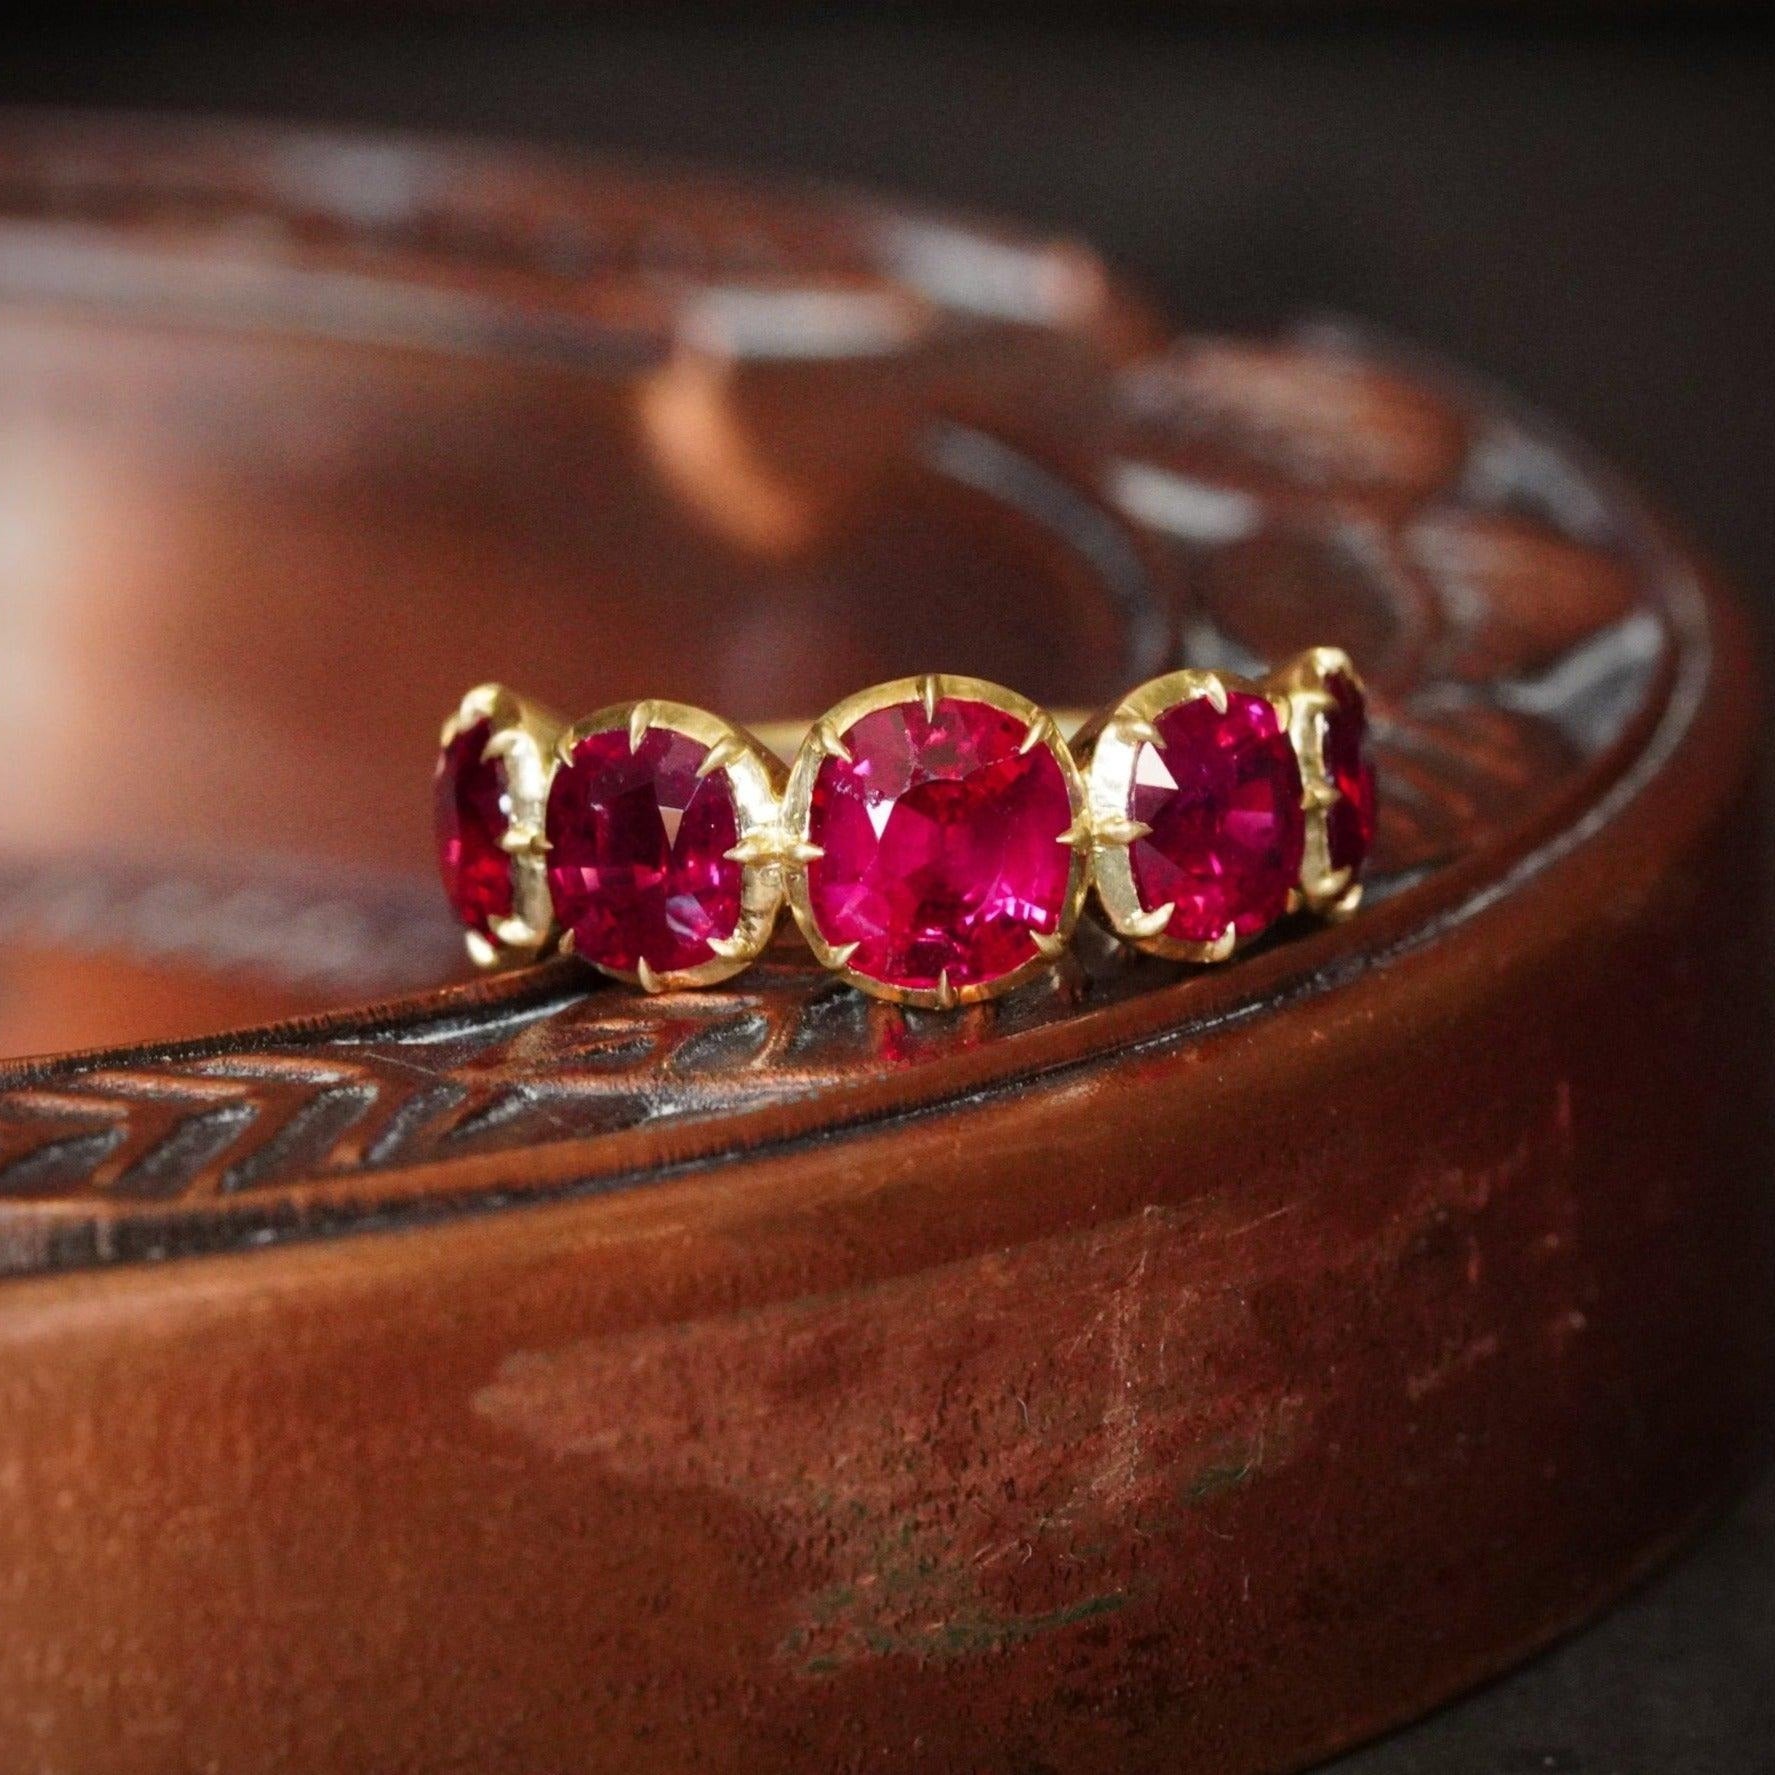 Victorian 5.86ct Burma Ruby Ring in 18K Gold